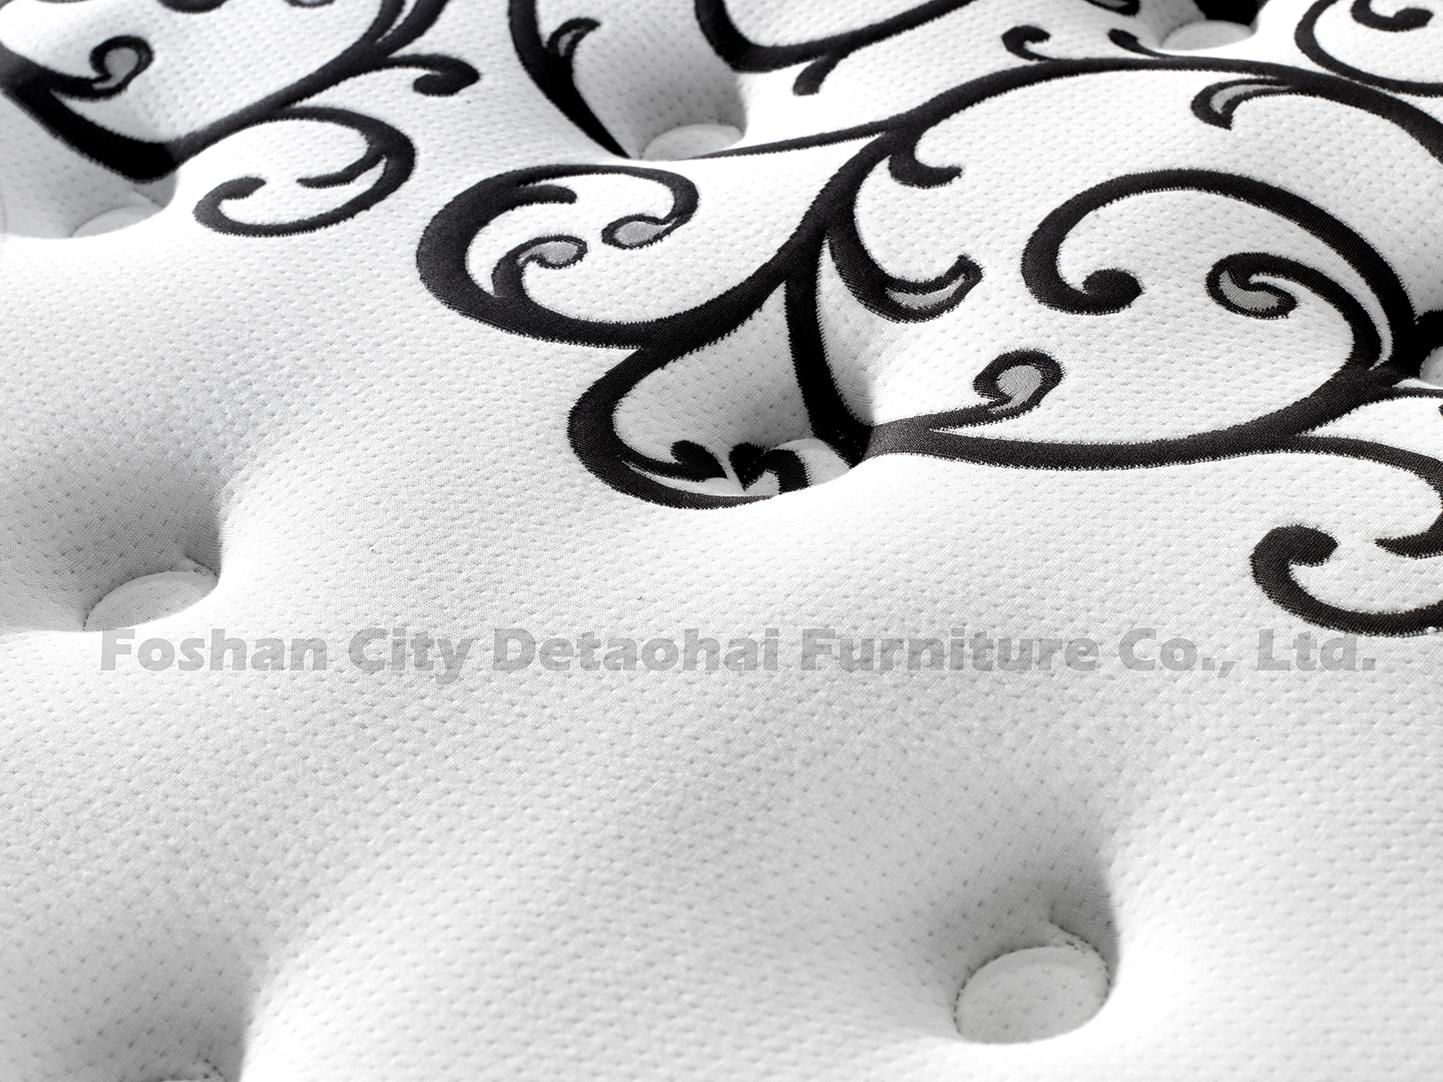 high quality pocket spring mattress with pillow top 3